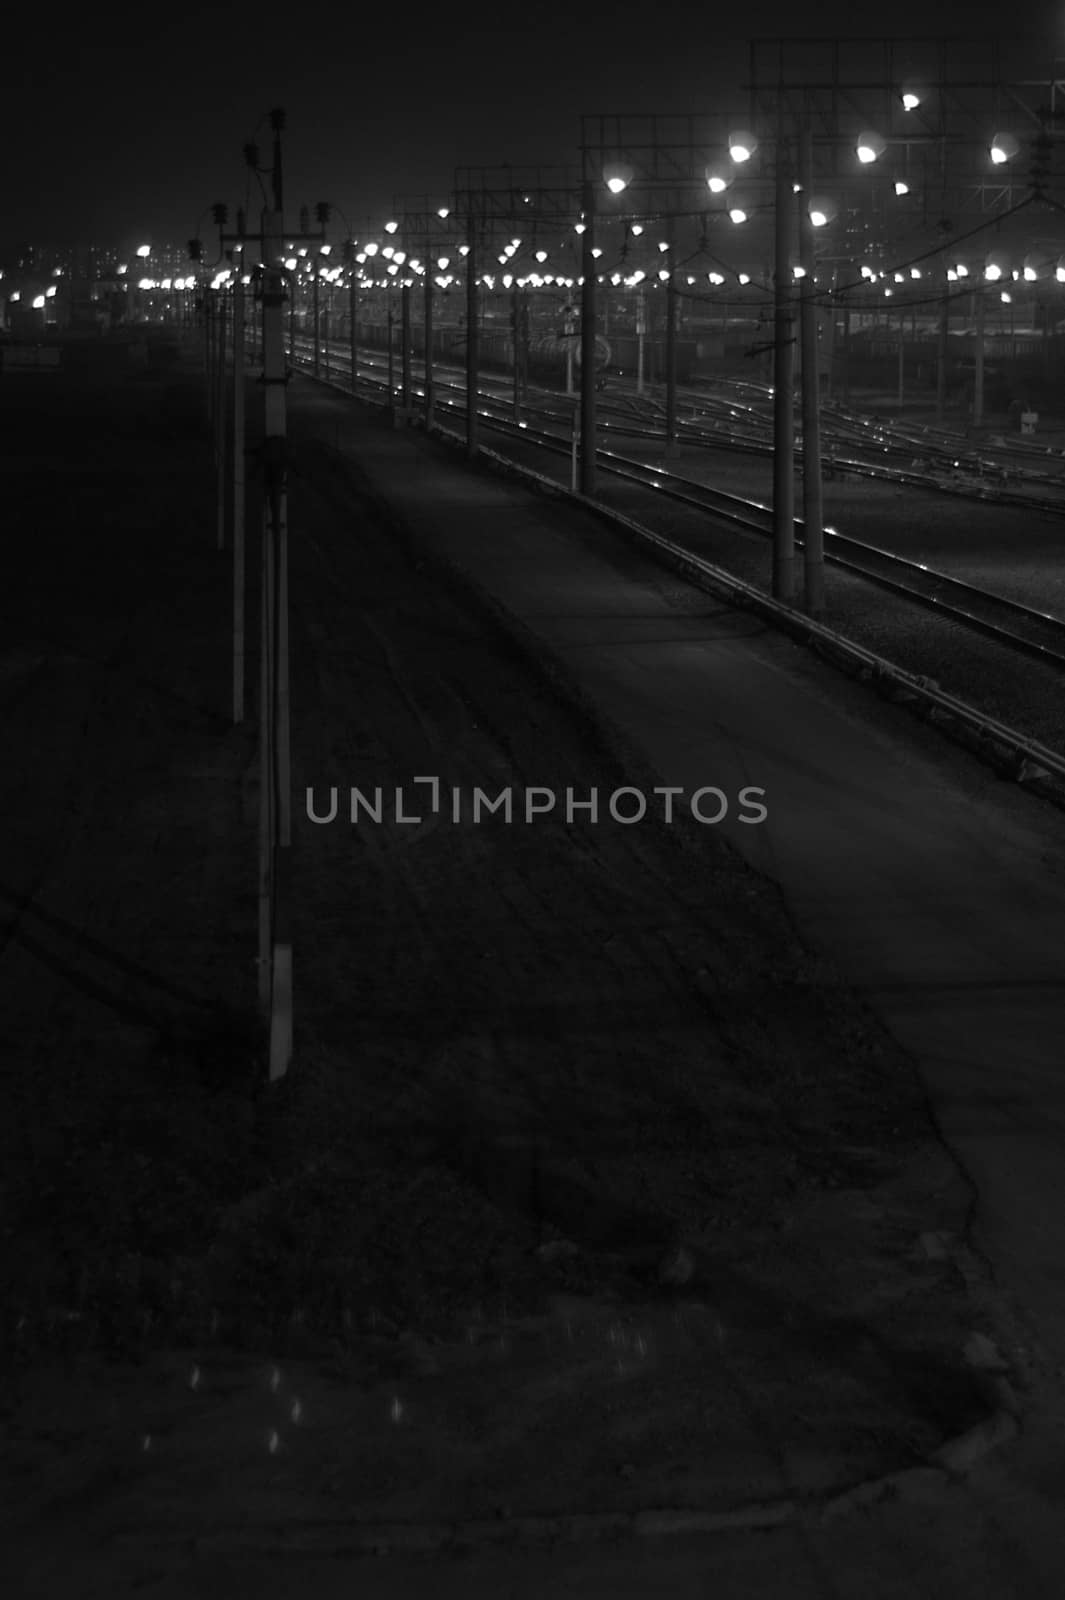 Night shooting of the crossing on the railway tracks, the bridging of the roads at the station flickers in the lights. by alexey_zheltukhin